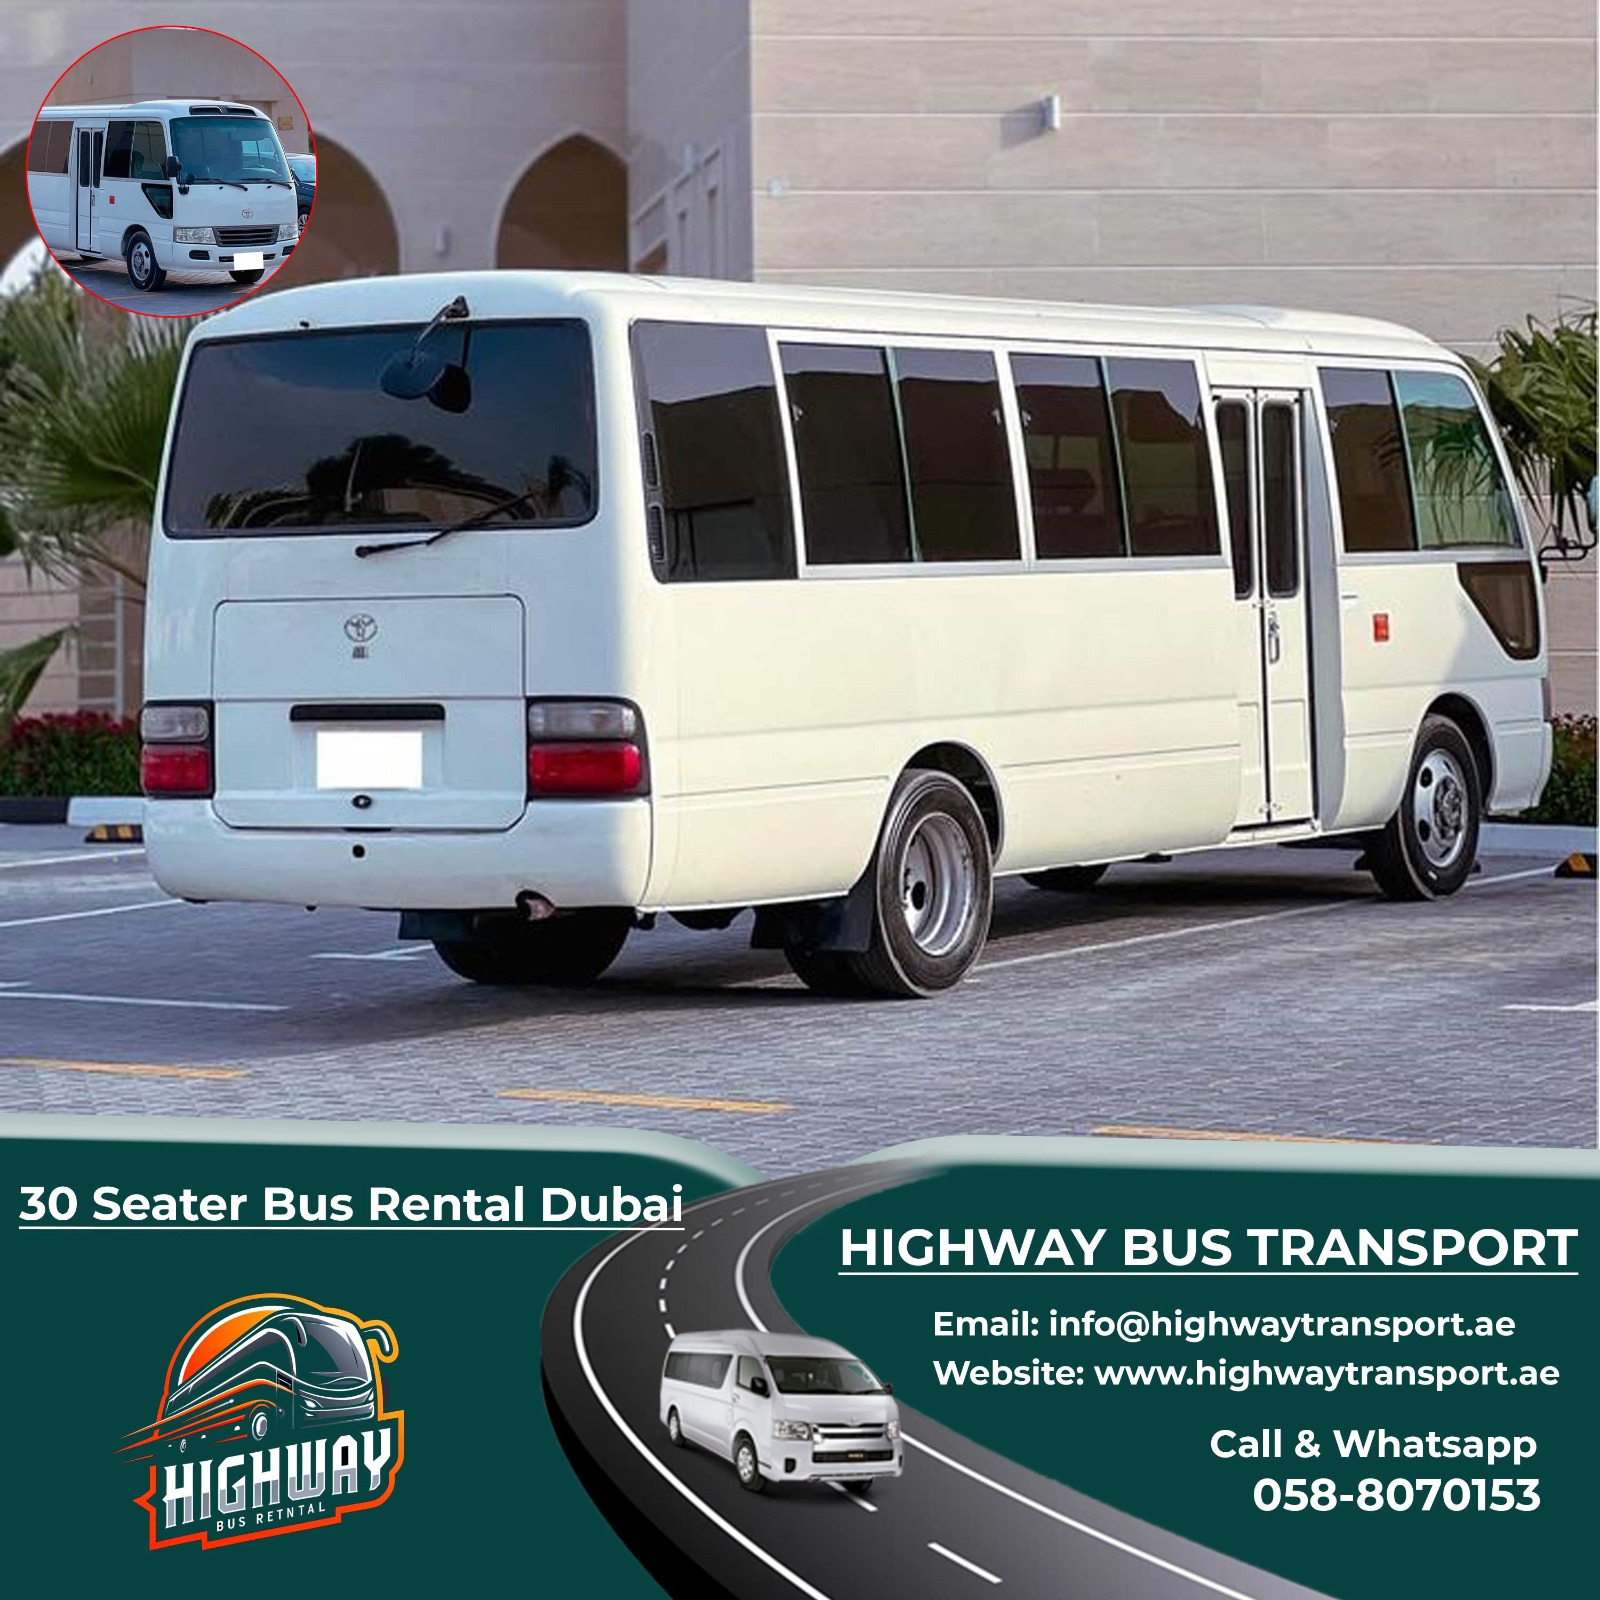 Image of a 30 seater bus available for rental in Dubai